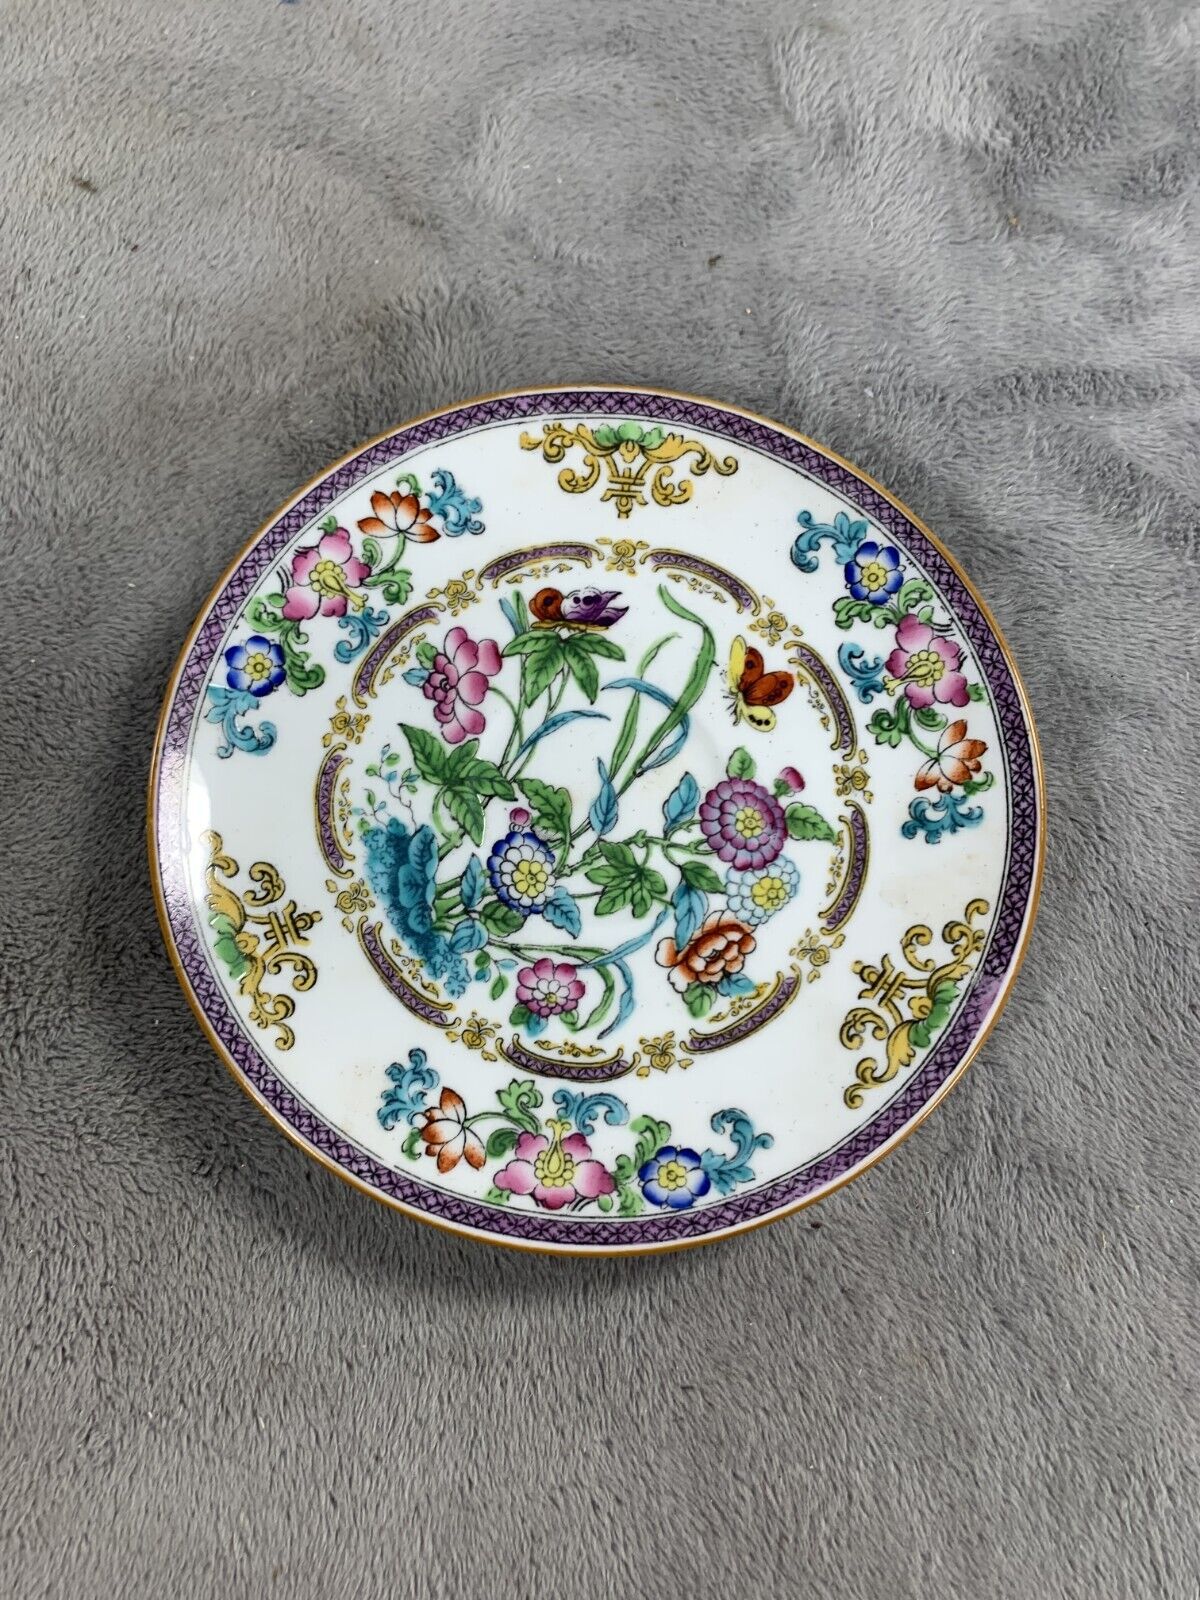 Rare Antique Minton B849 Pattern Rimmed Tea Plate Floral Butterfly Insect